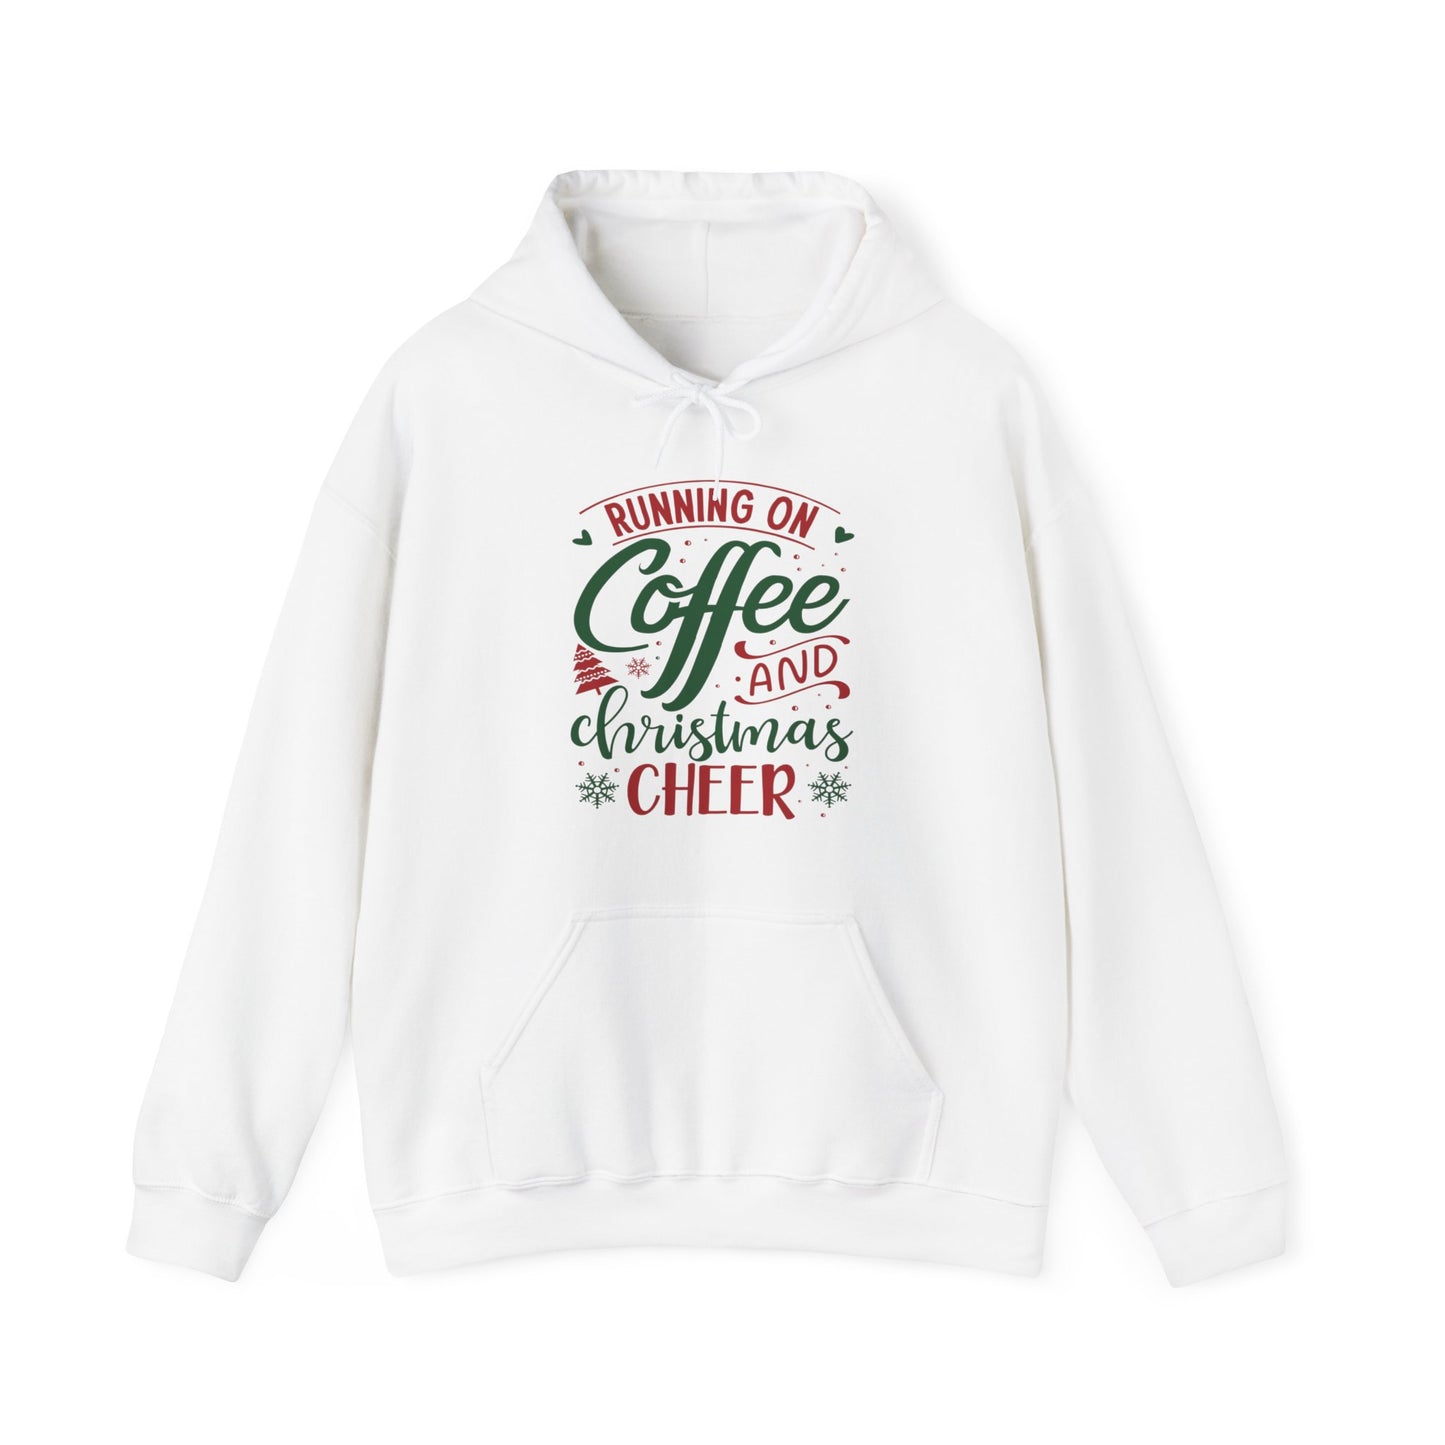 Christmas Cheer Hooded Sweatshirt For Holiday Coffee Lovers Hoodie For Fun Xmas Lounge Clothes